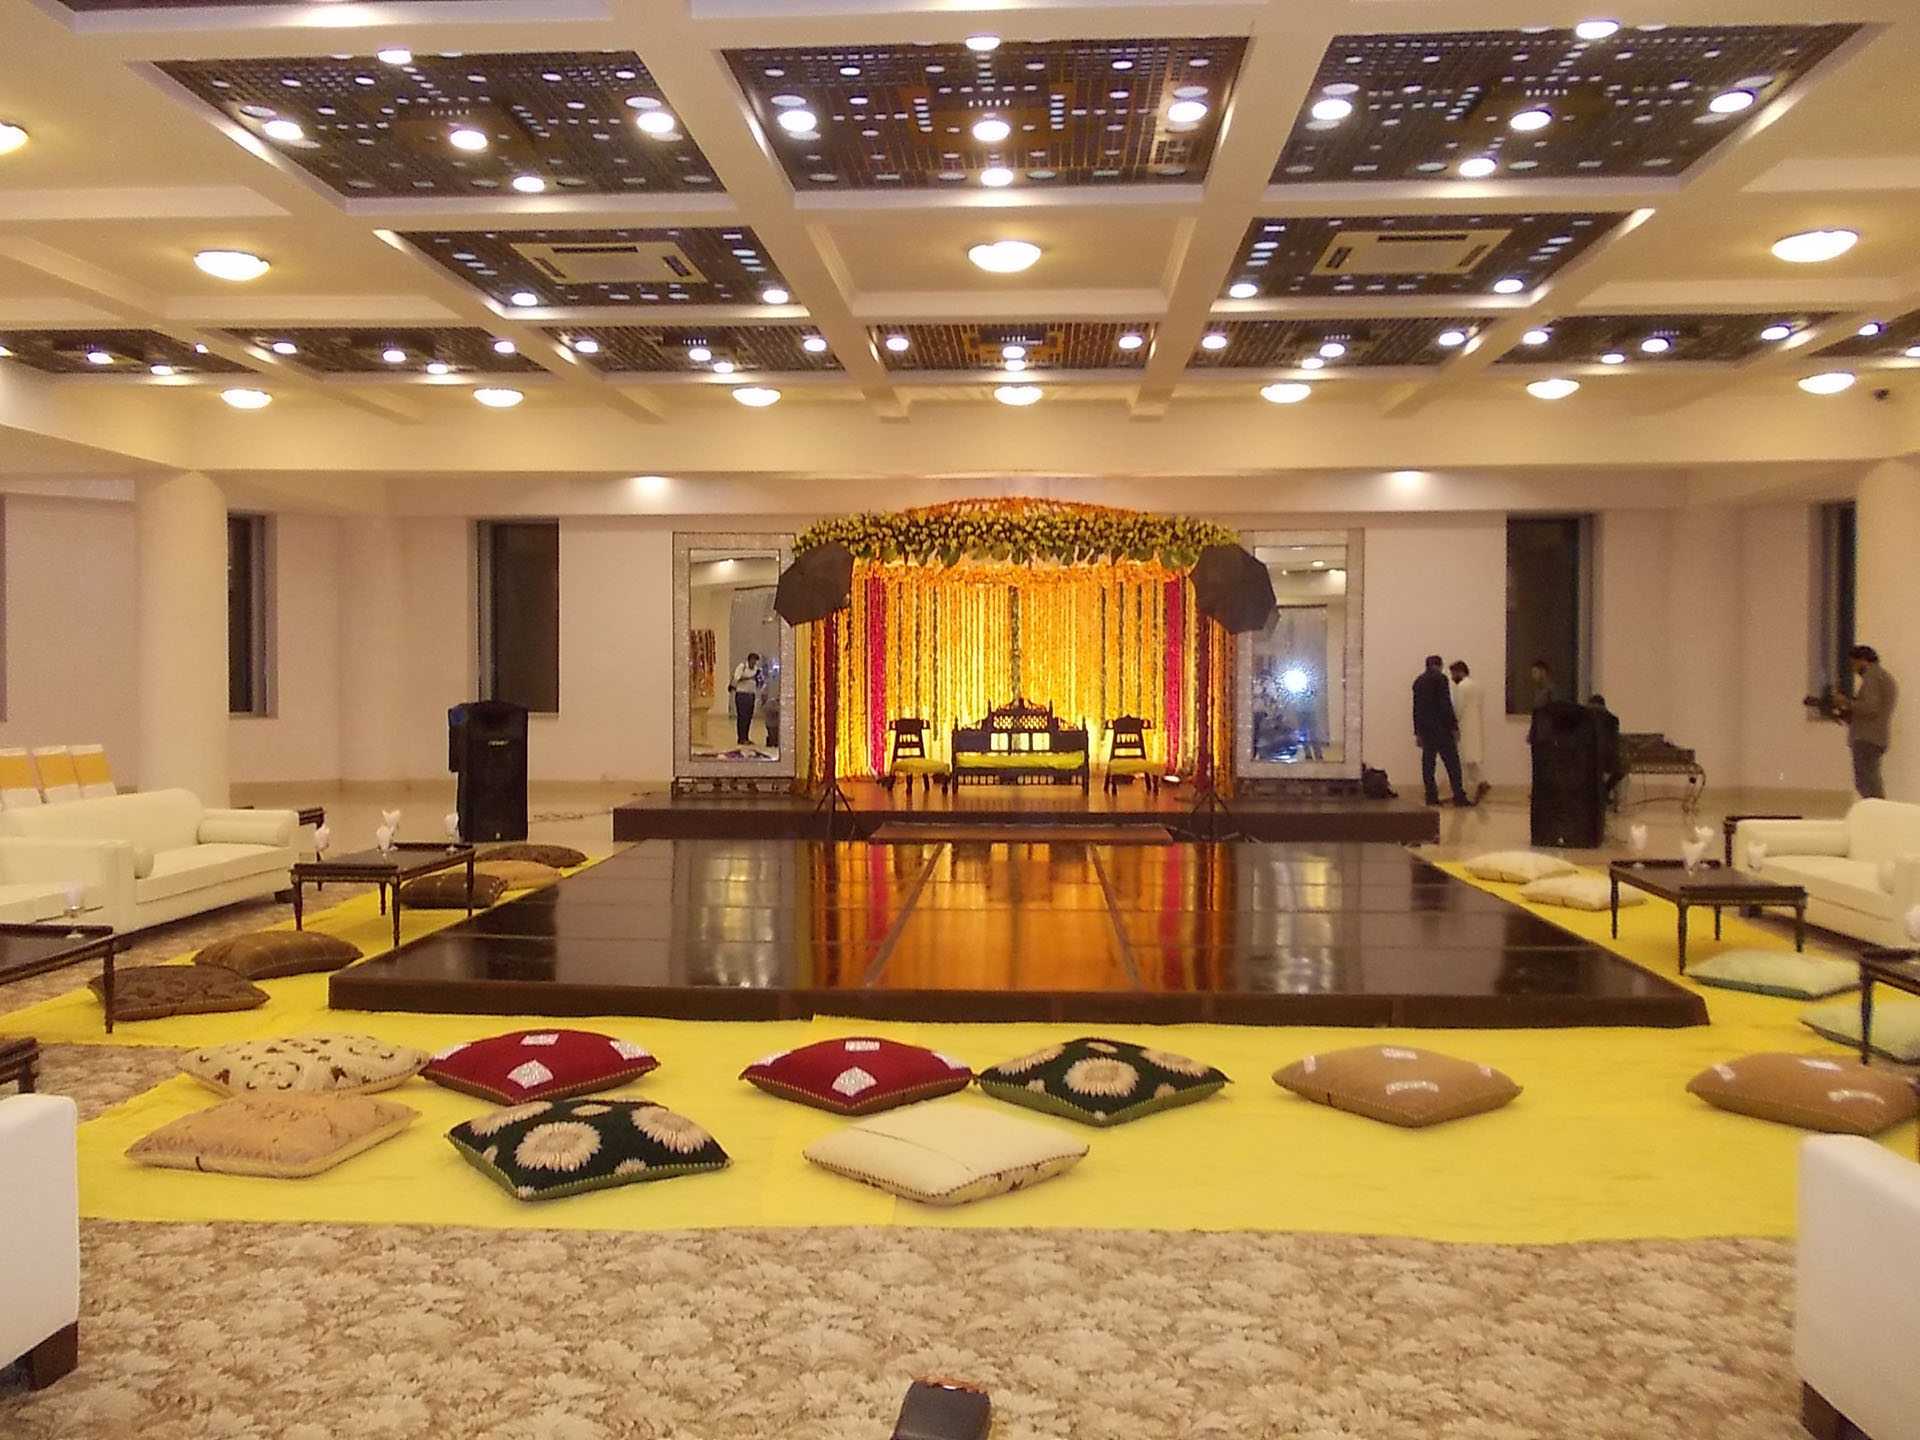 <p>In an exclusive residential area of Lahore, the centre provides facilities for social gatherings and political functions for the community residents.&nbsp;</p>